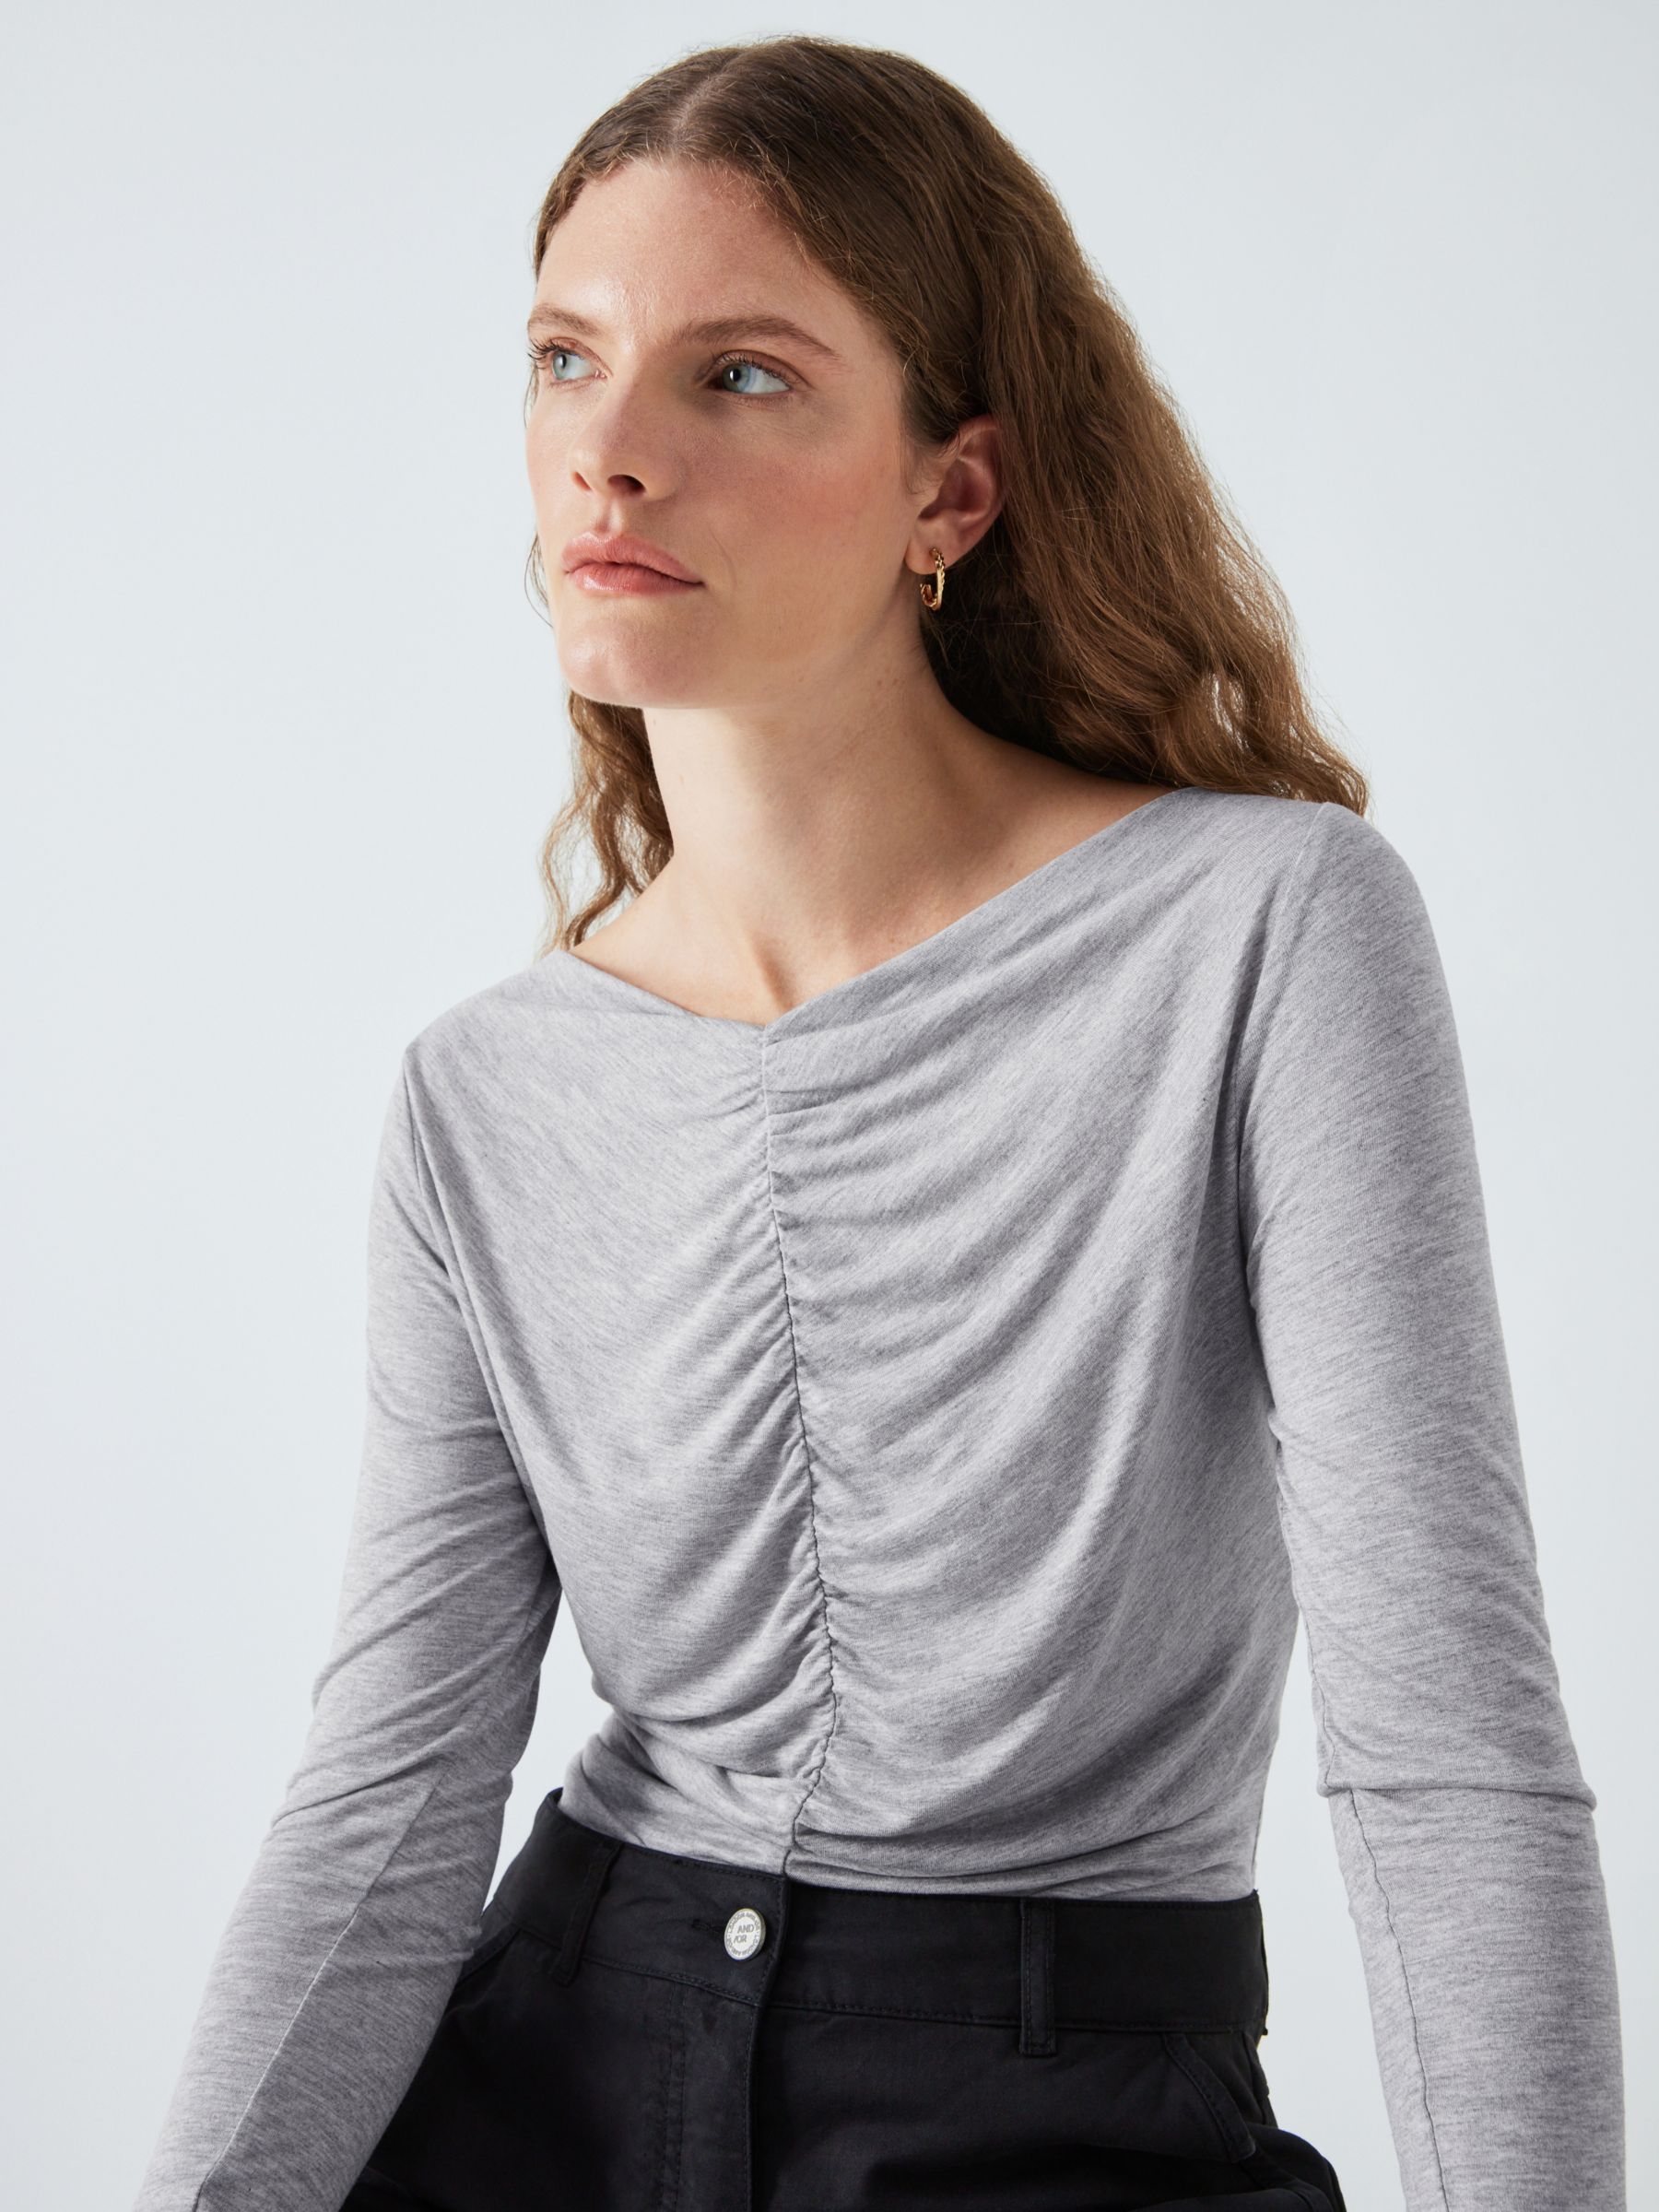 AND/OR Raine Plain Ruched Top, Light Grey Marl at John Lewis & Partners